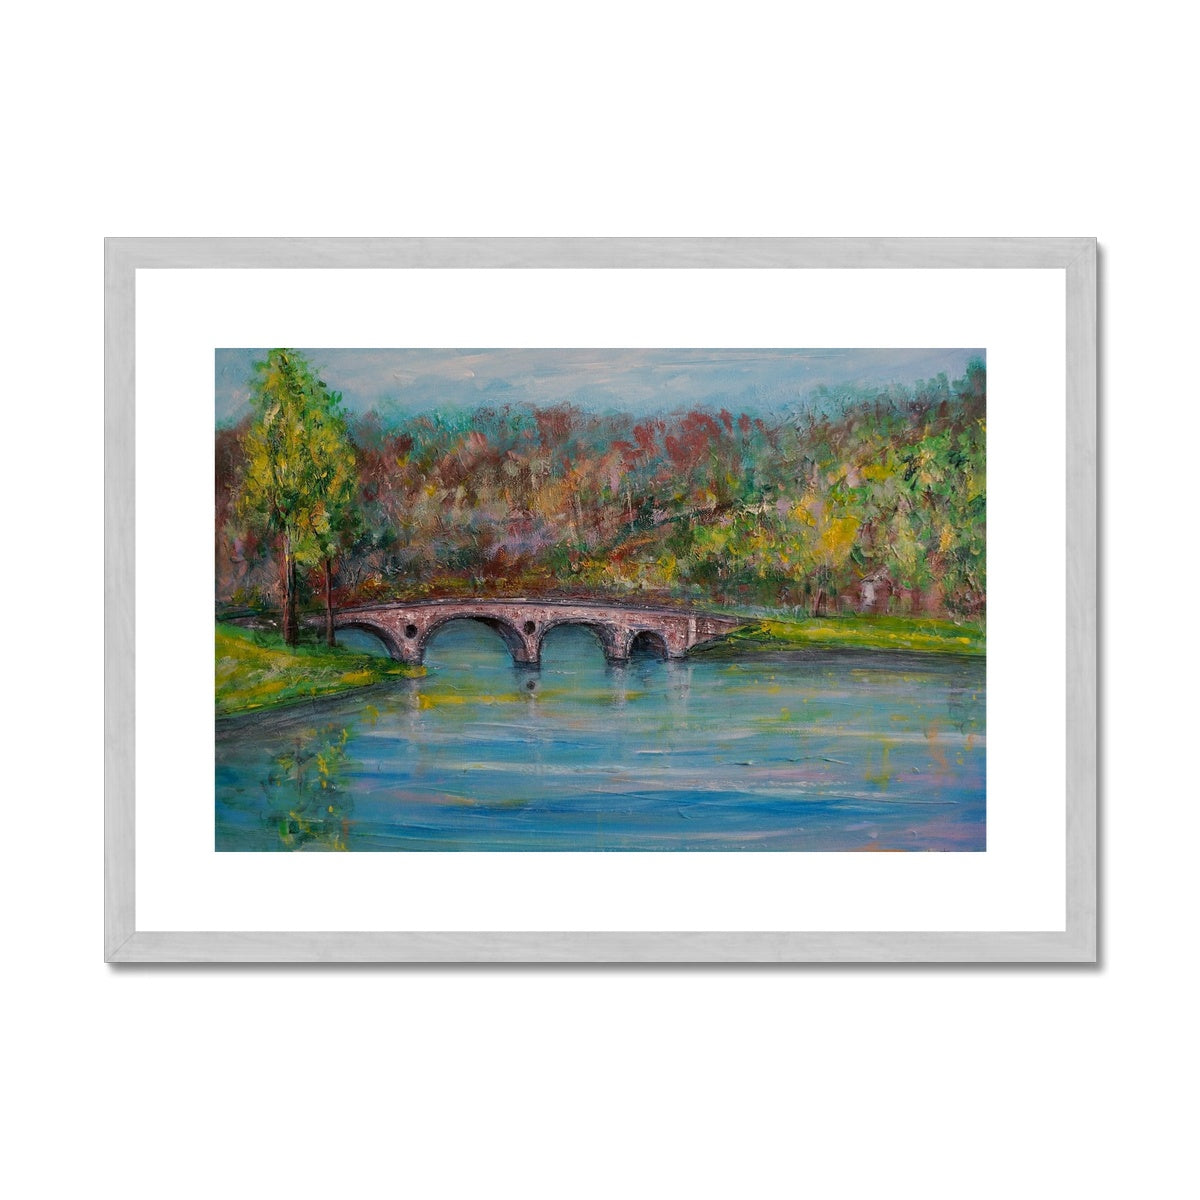 Kenmore Bridge Painting | Antique Framed & Mounted Prints From Scotland-Antique Framed & Mounted Prints-Scottish Highlands & Lowlands Art Gallery-A2 Landscape-Silver Frame-Paintings, Prints, Homeware, Art Gifts From Scotland By Scottish Artist Kevin Hunter